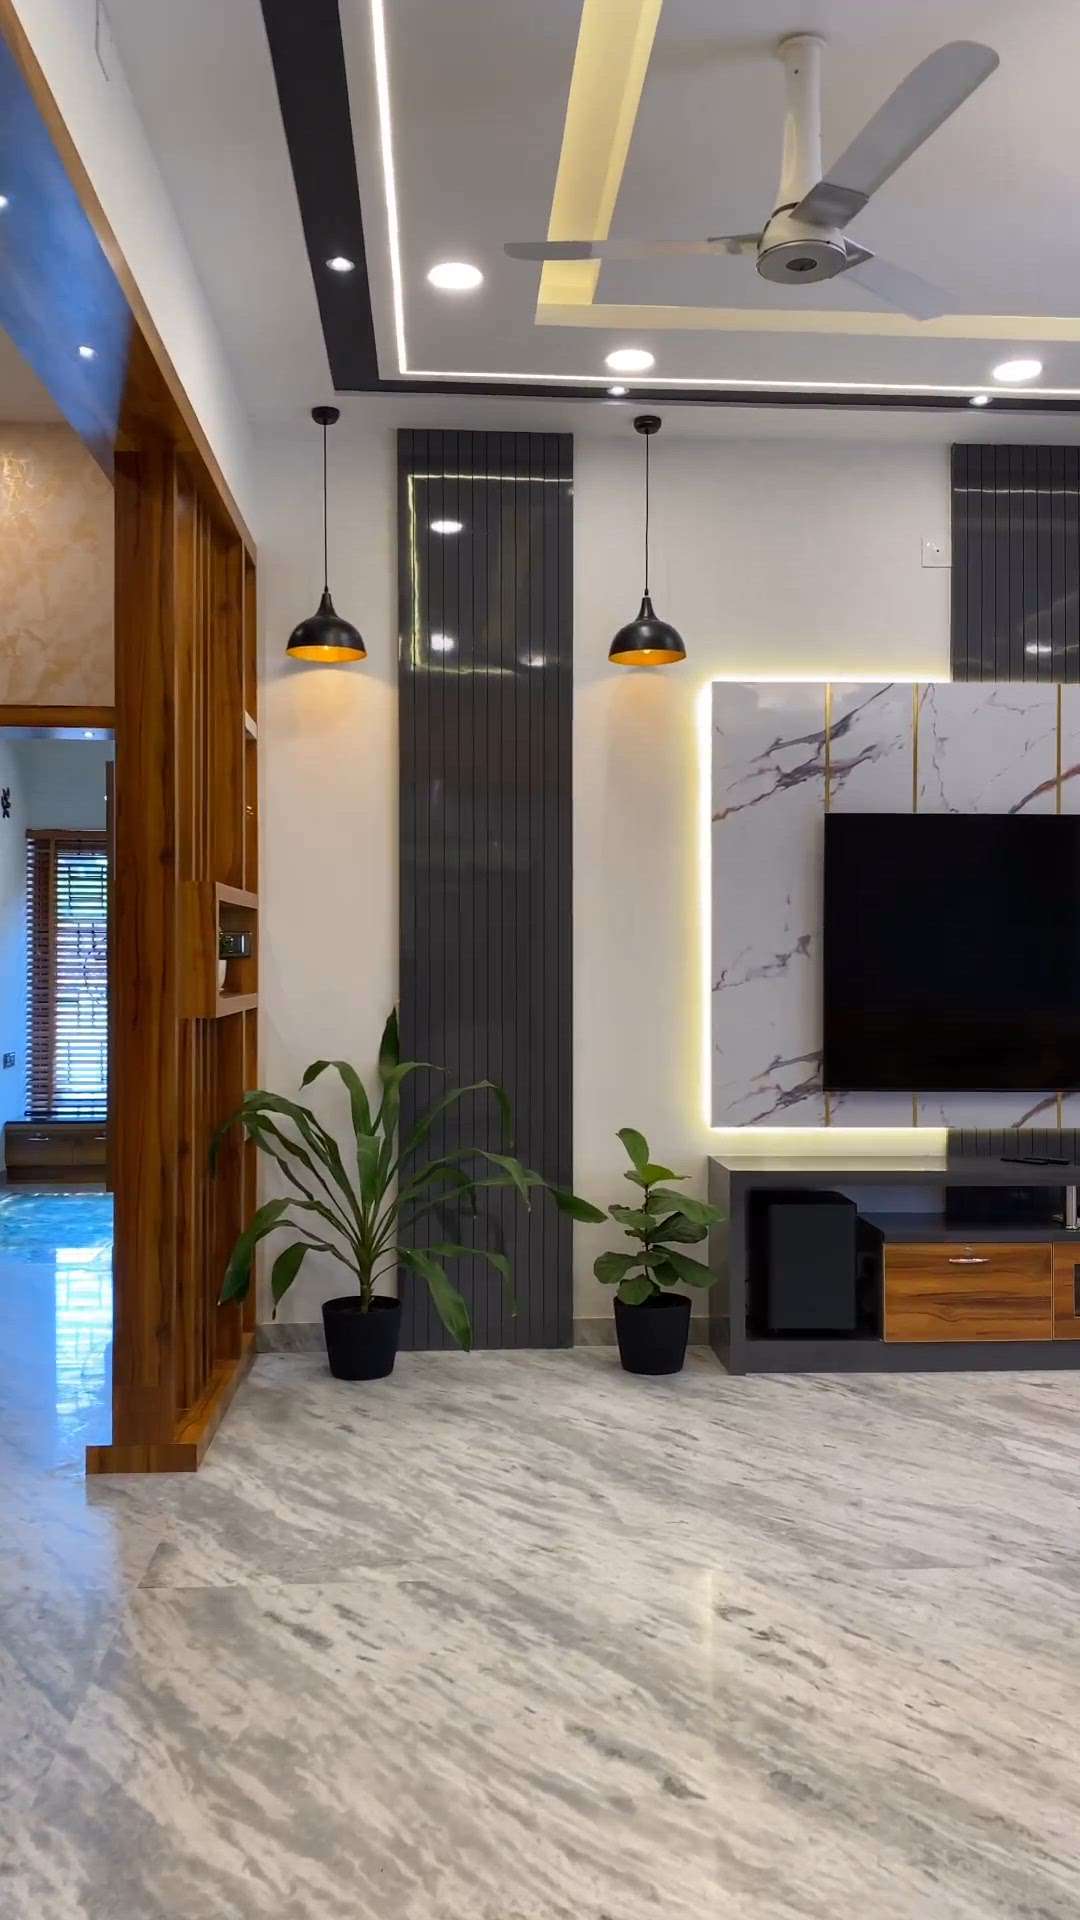 Follow for Daily Update & Diffrent Design @
We are available for interior design full work
#officeinteriors #workstation #studygram #drawing #livingroom #master #kidsfashion #toilet #taracegarden🌿 #balcony#topfloor #ceilingdesign#glasspartition#woodenpartition#guestbedroom#woodenfurniture #modularhome #interiordesignstudio#kitchendesign #interiordesigns#bedroomdesign #modularkitchen#mandir#diningroom #modularkitchen #office #ModularKitchen